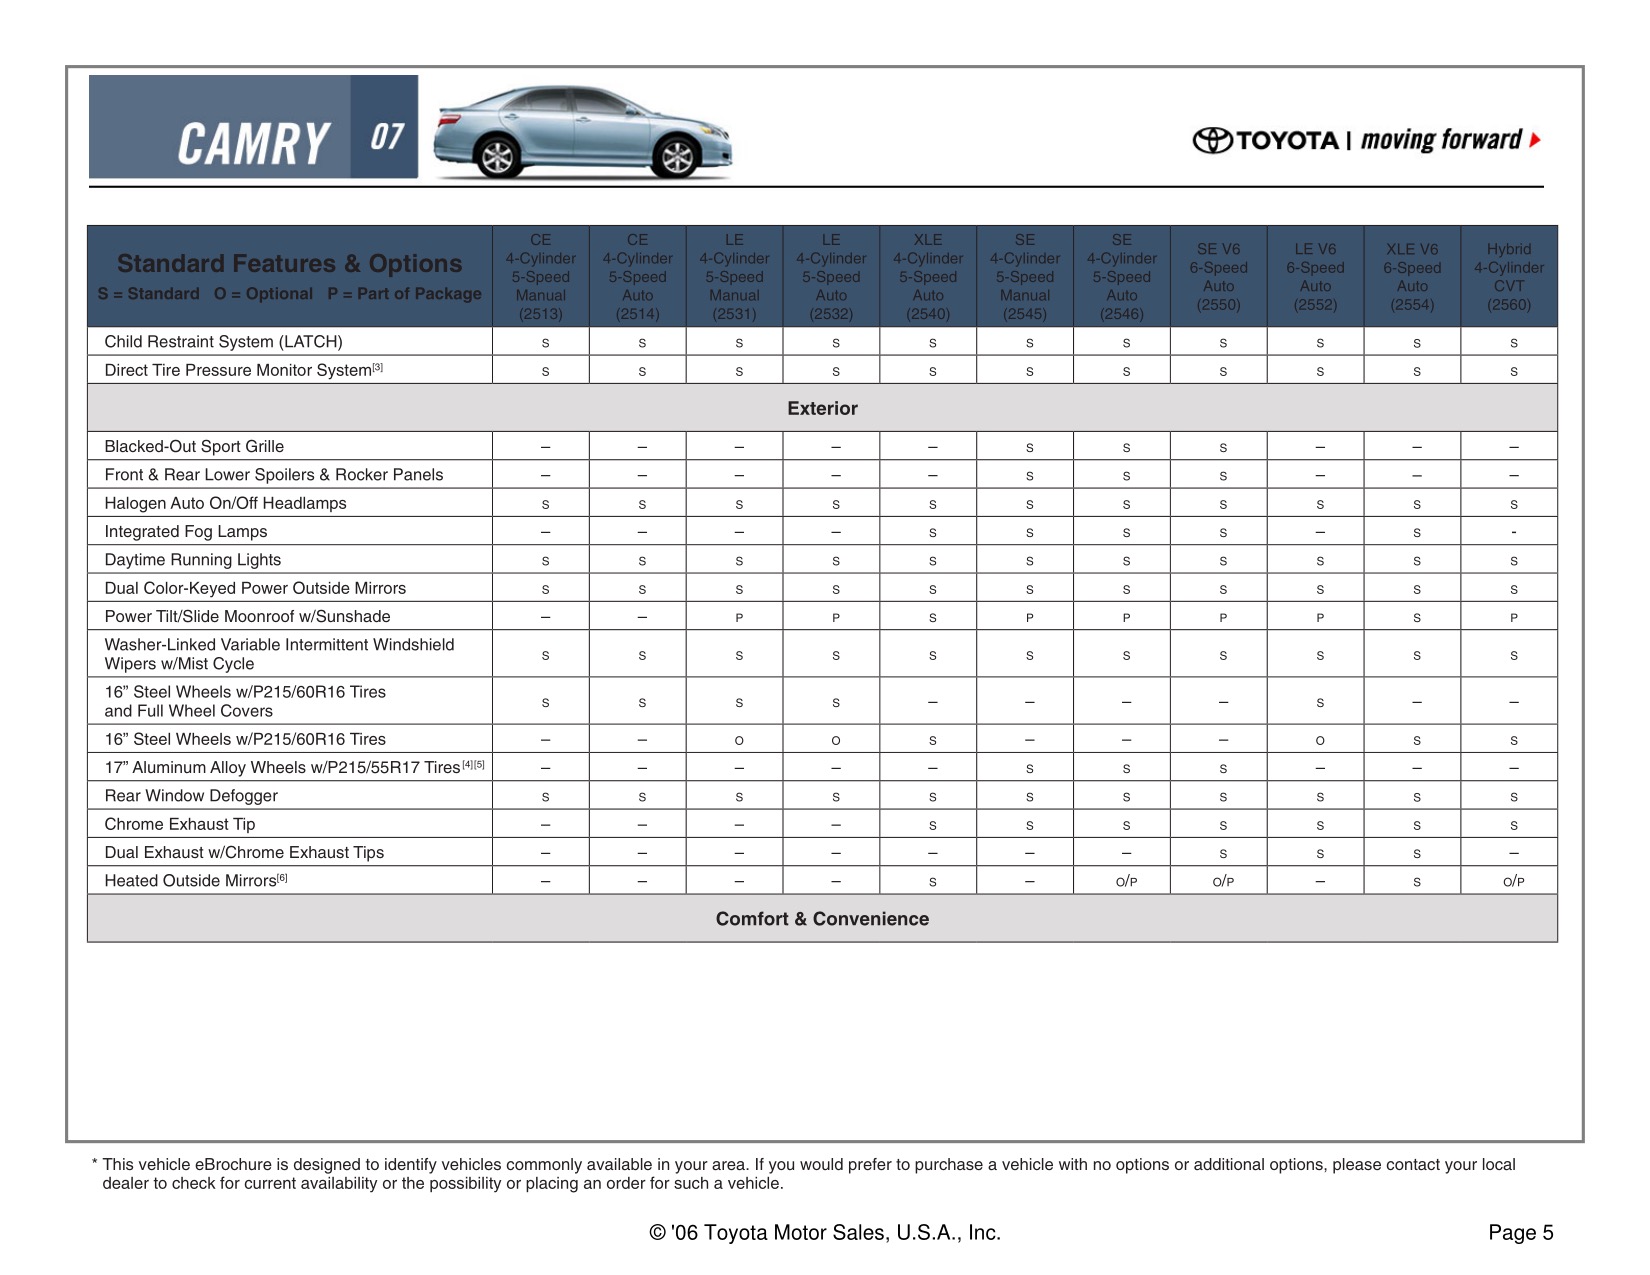 2007 Toyota Camry Brochure Page 10